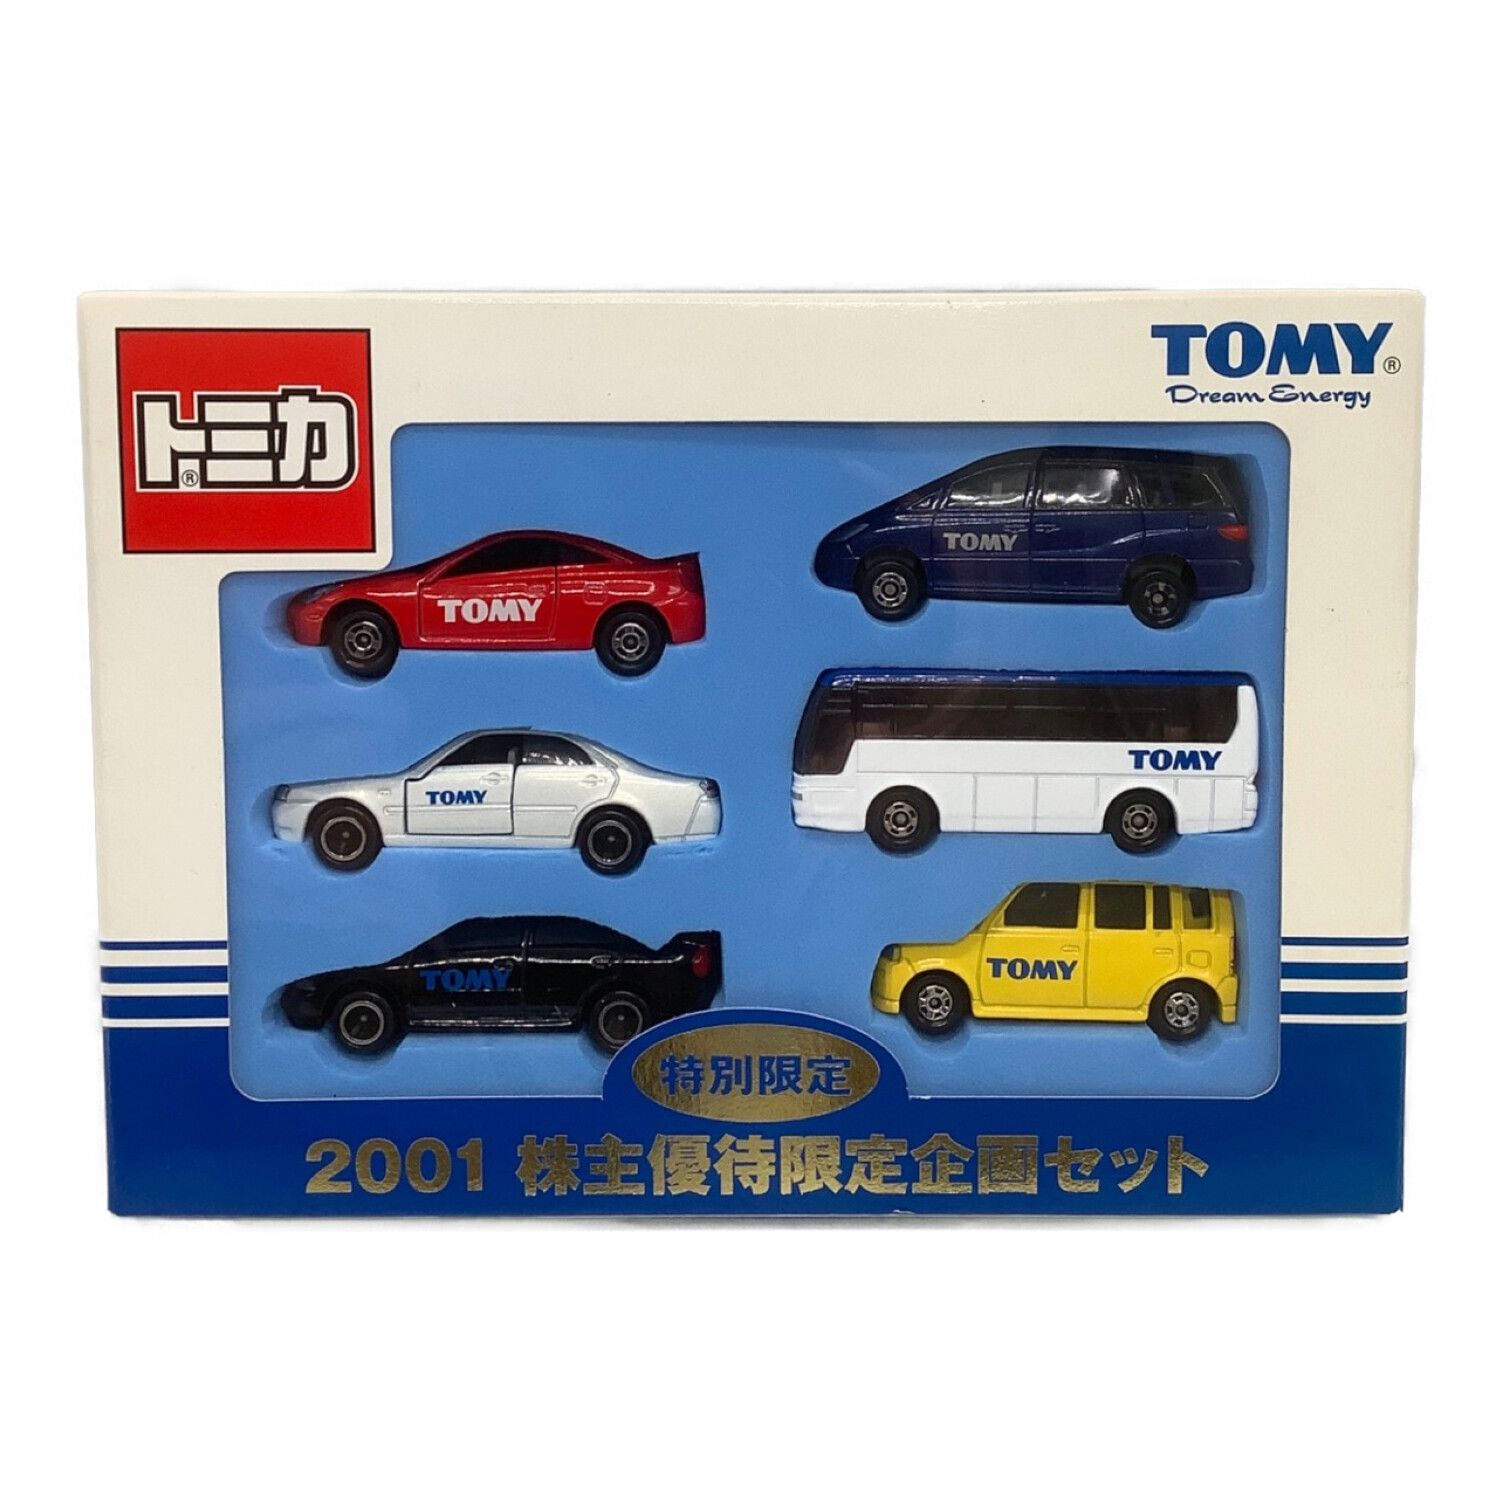 TOMY (トミー) トミカ 2001株主優待限定企画セット｜トレファクONLINE